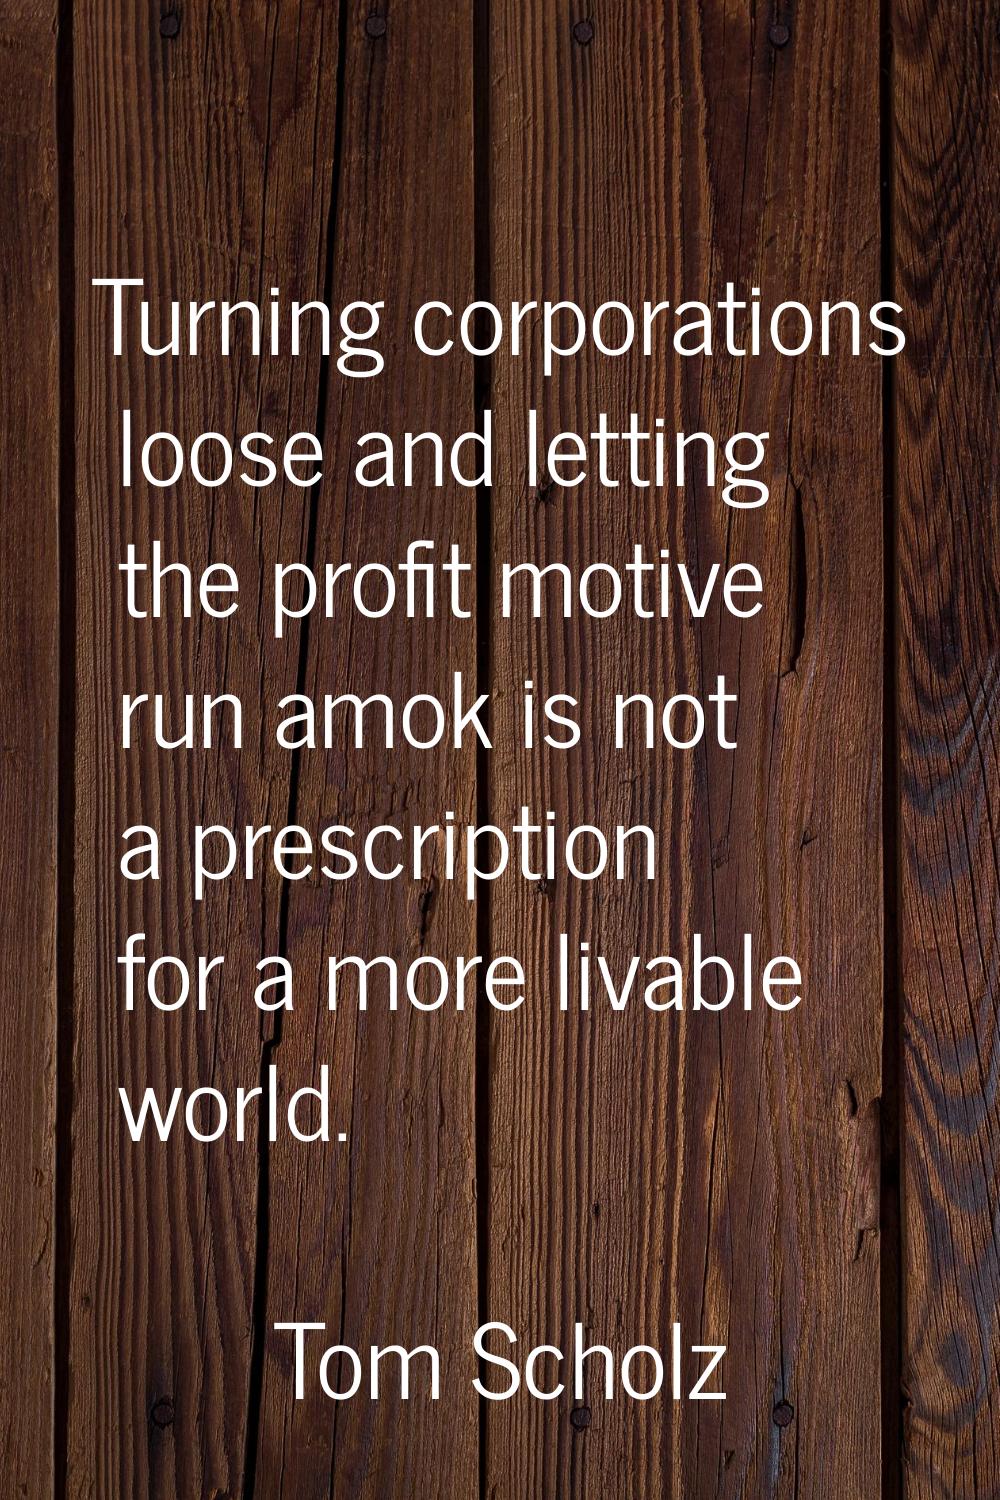 Turning corporations loose and letting the profit motive run amok is not a prescription for a more 